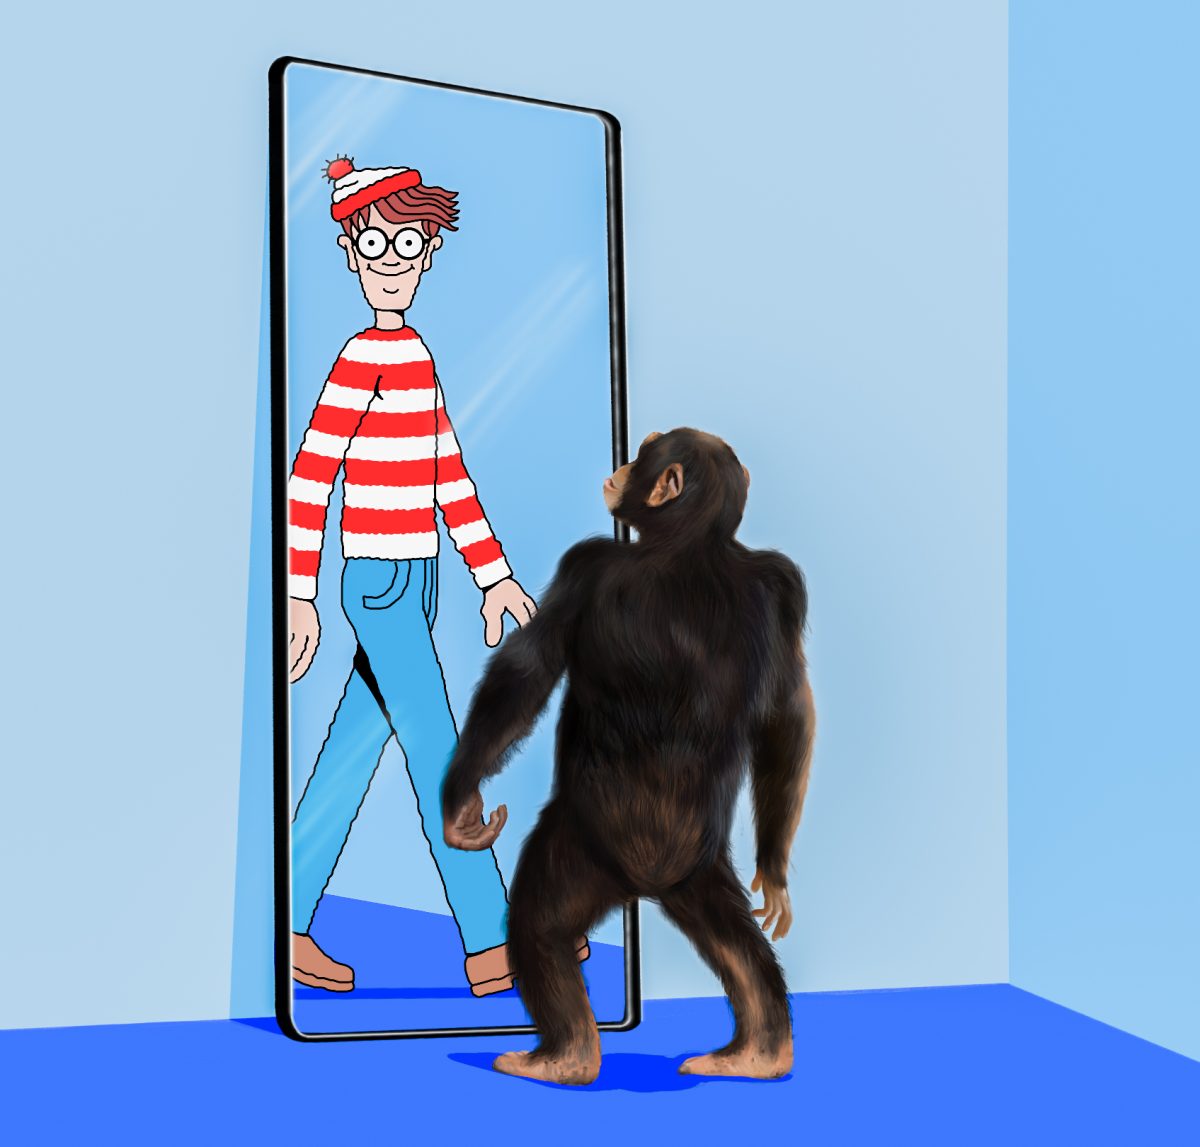 A chimp stares into a mirror and sees a reflection of Waldo. Illustration by Bianca Oppedisano / Mass Media Staff.